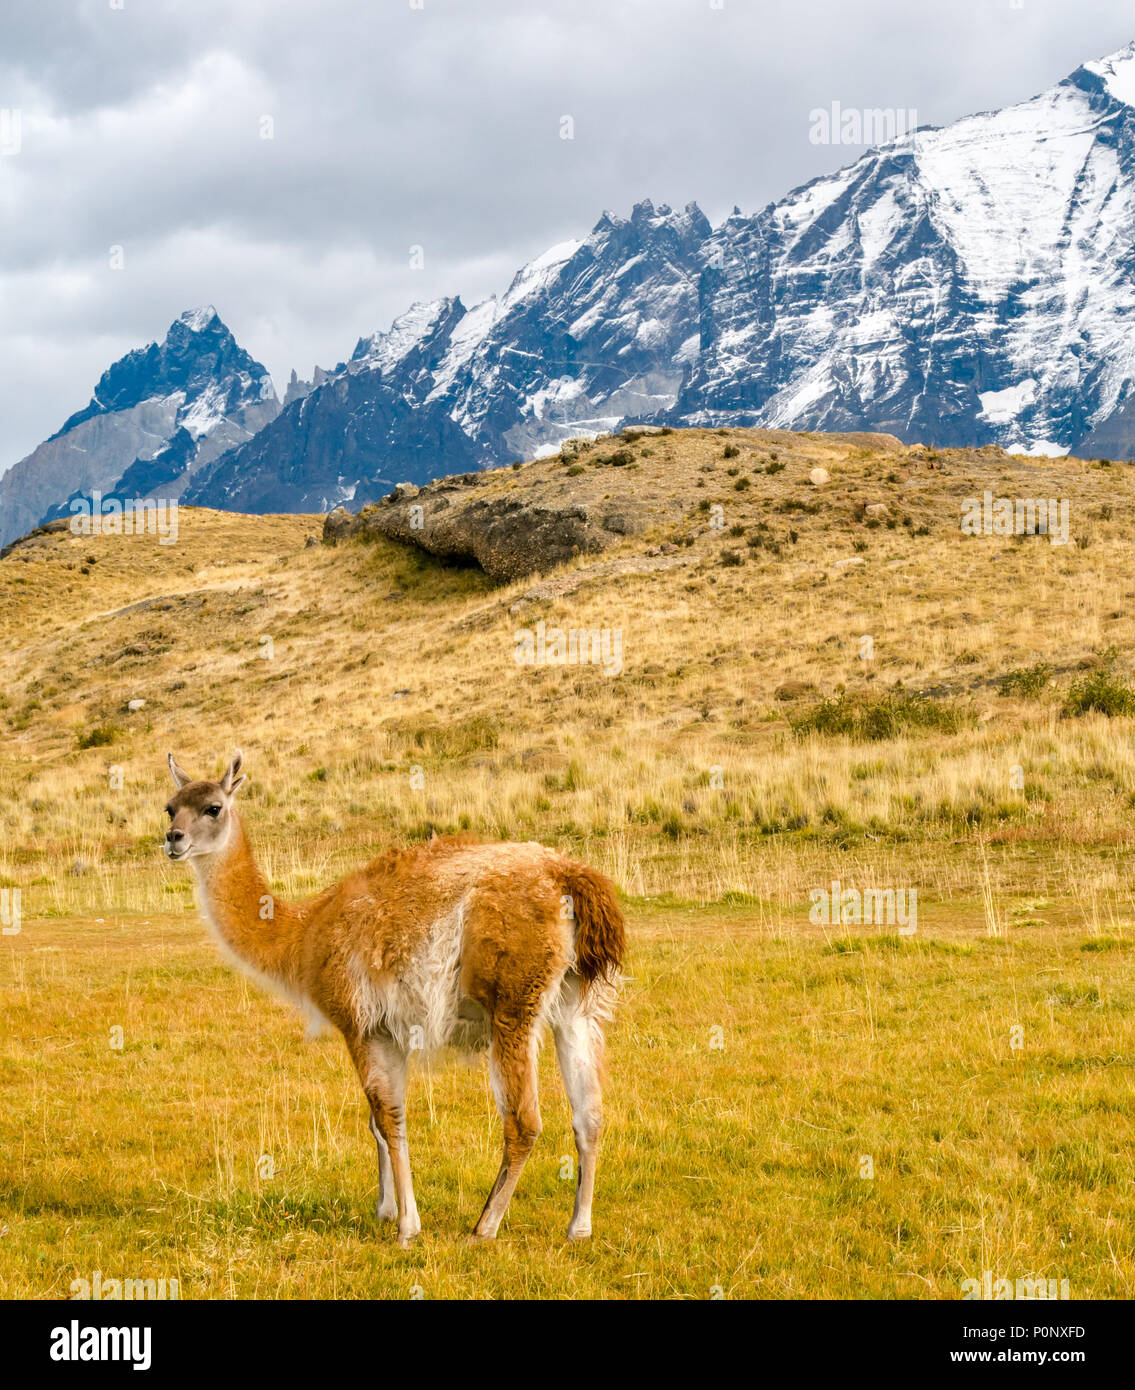 Guanaco, Lama guanicoe, standing in front of mountain peaks of Torres del Paine National Park, Patagonia, Chile, South America Stock Photo